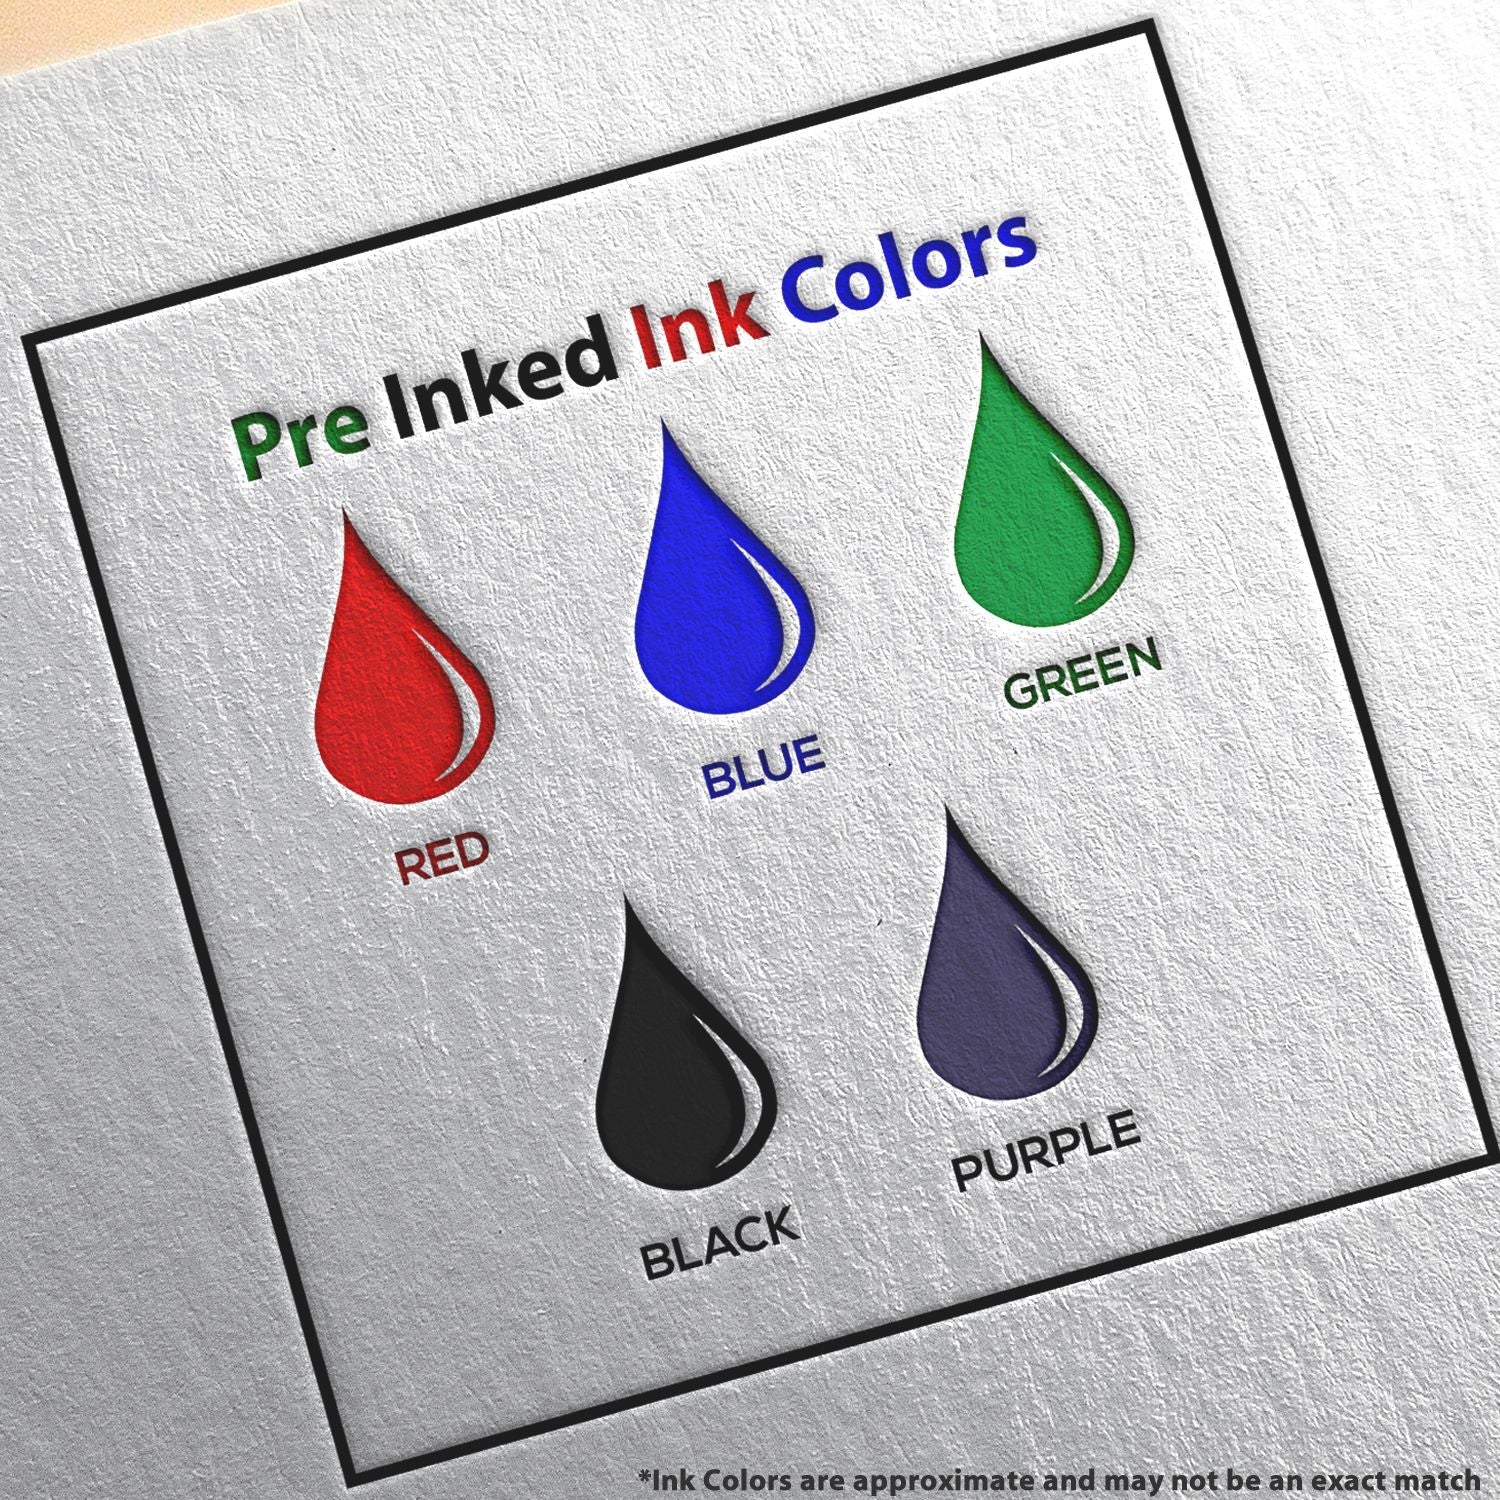 A picture showing the different ink colors or hues available for the Premium MaxLight Pre-Inked Delaware Engineering Stamp product.